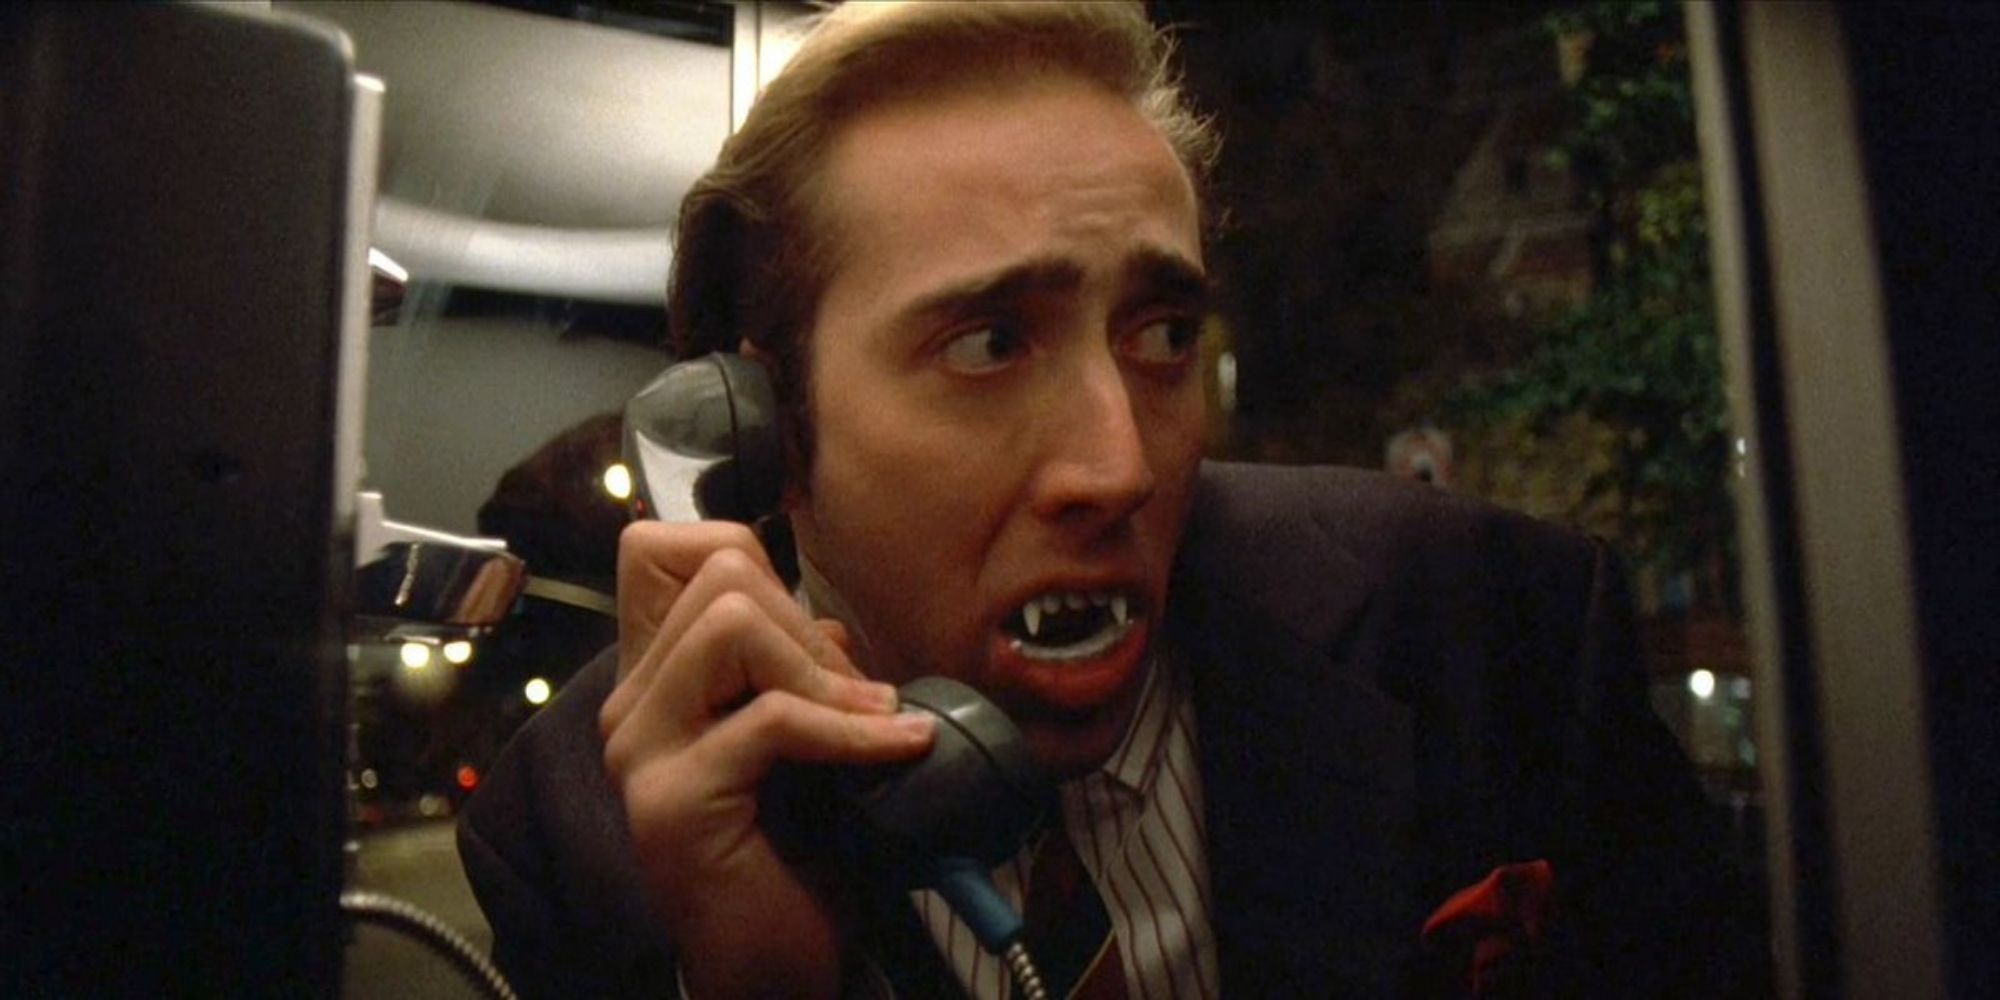 nicolas cage in Vampire's Kiss with vampire teeth on pay phone